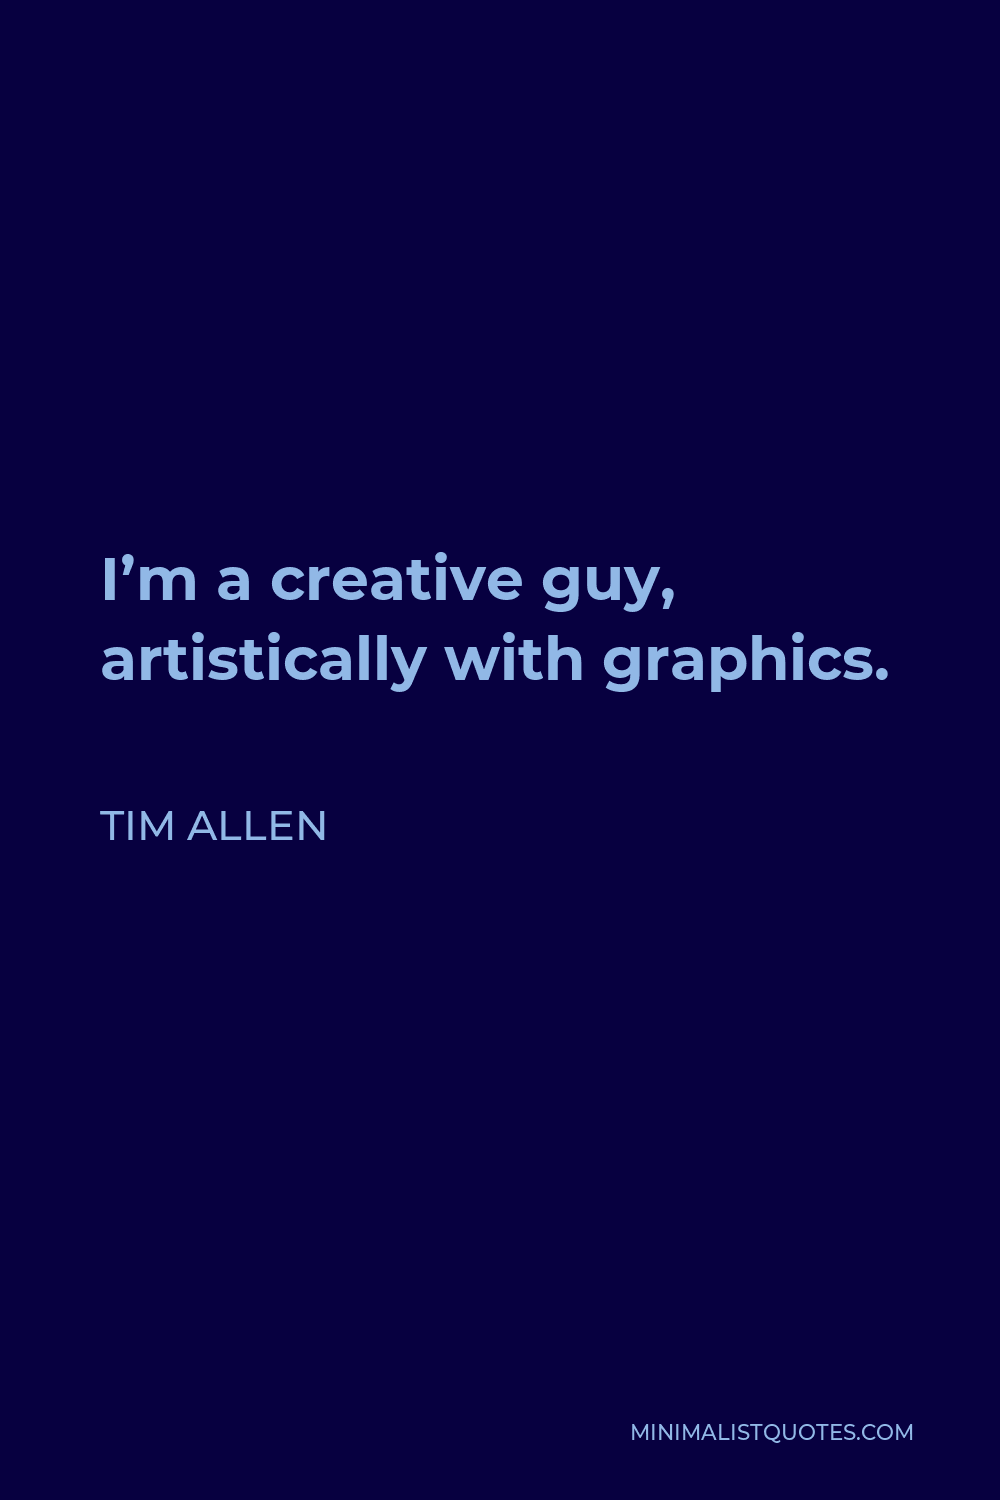 Tim Allen Quote - I’m a creative guy, artistically with graphics.